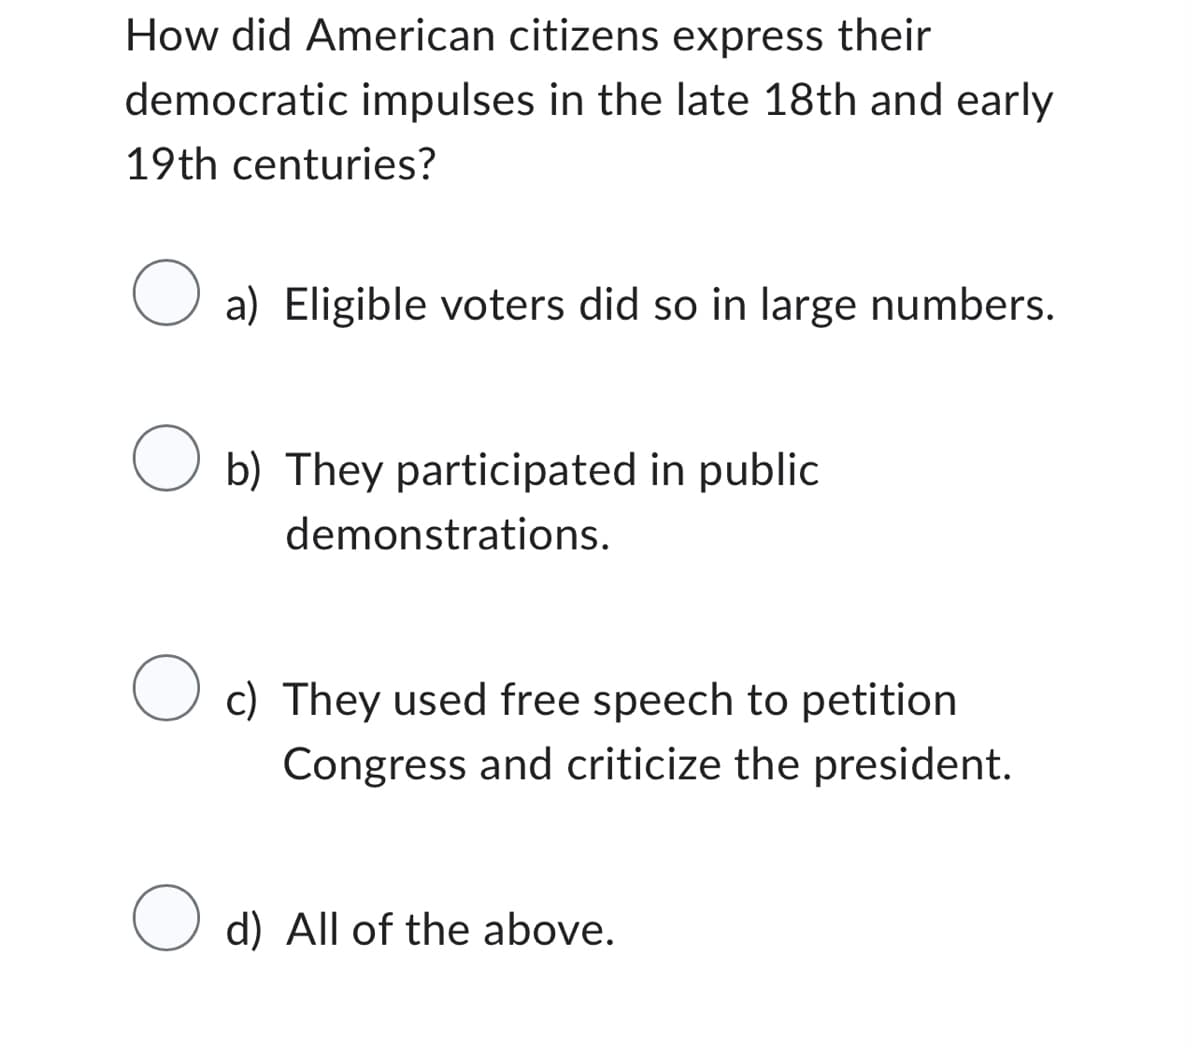 How did American citizens express their
democratic impulses in the late 18th and early
19th centuries?
O a) Eligible voters did so in large numbers.
O b) They participated in public
demonstrations.
O c) They used free speech to petition
Congress and criticize the president.
O d) All of the above.